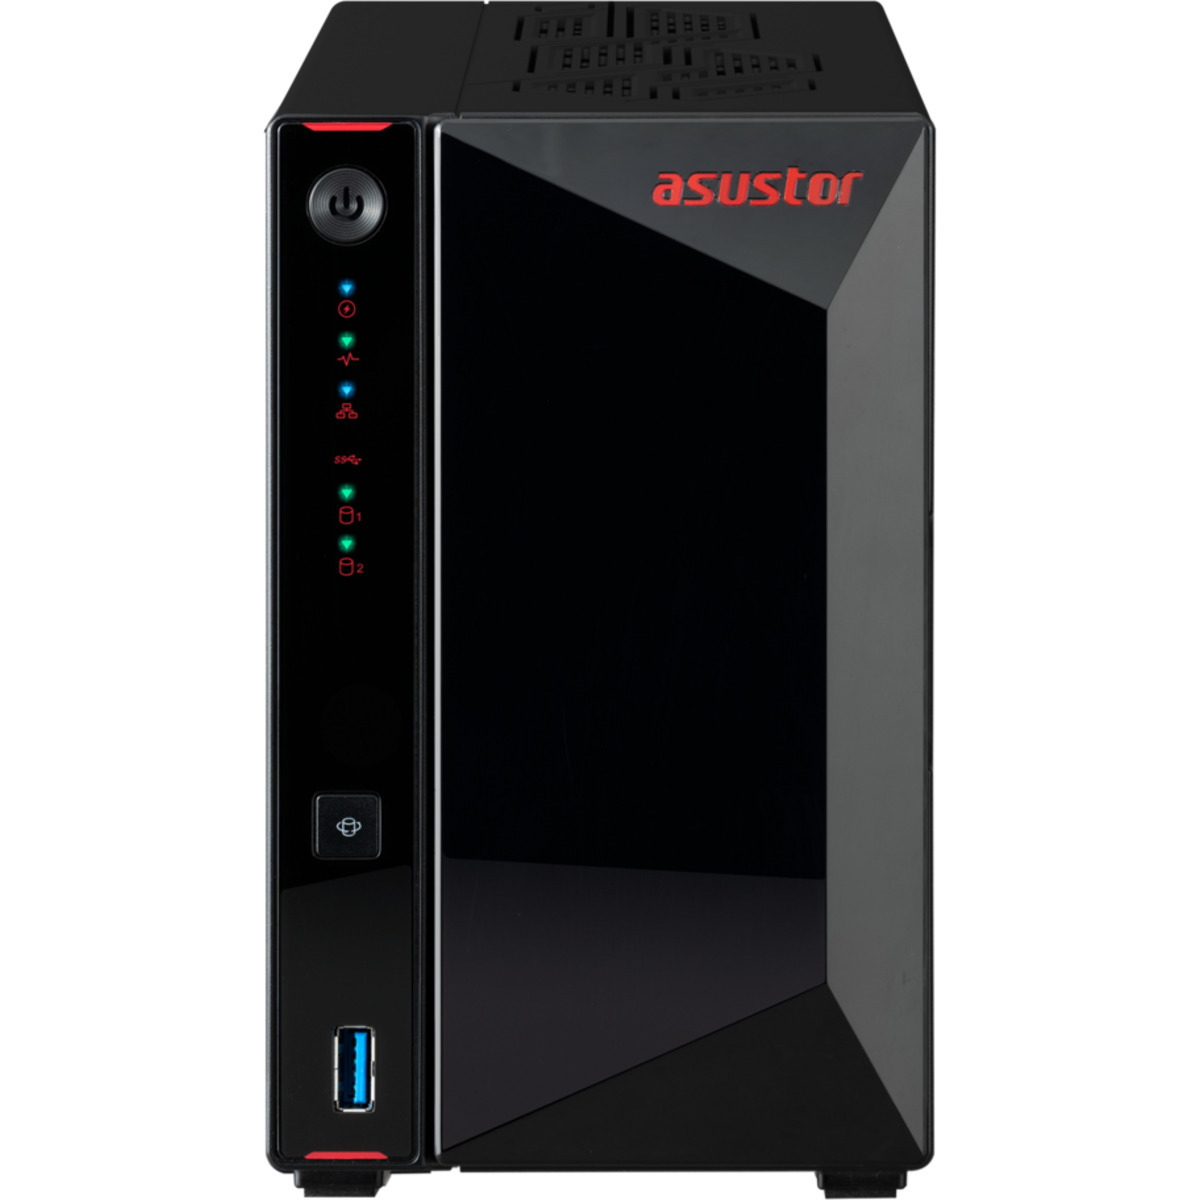 ASUSTOR Nimbustor 2 Gen2 AS5402T 10tb 2-Bay Desktop Multimedia / Power User / Business NAS - Network Attached Storage Device 1x10tb Seagate EXOS X18 ST10000NM018G 3.5 7200rpm SATA 6Gb/s HDD ENTERPRISE Class Drives Installed - Burn-In Tested - FREE RAM UPGRADE Nimbustor 2 Gen2 AS5402T